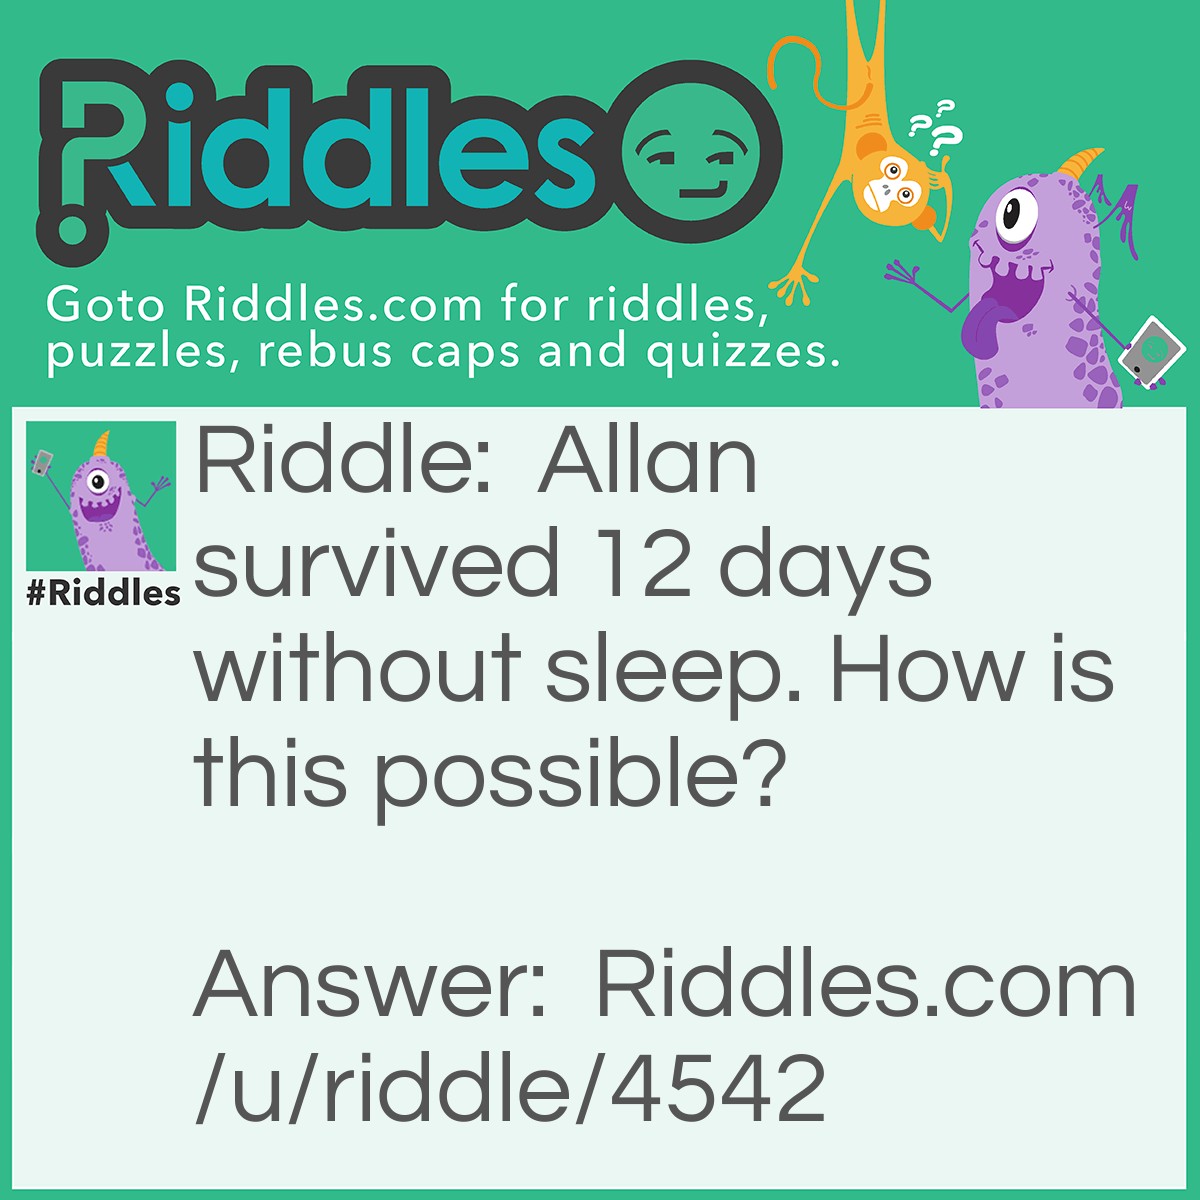 Riddle: Allan survived 12 days without sleep. How is this possible? Answer: He sleeps during the night.